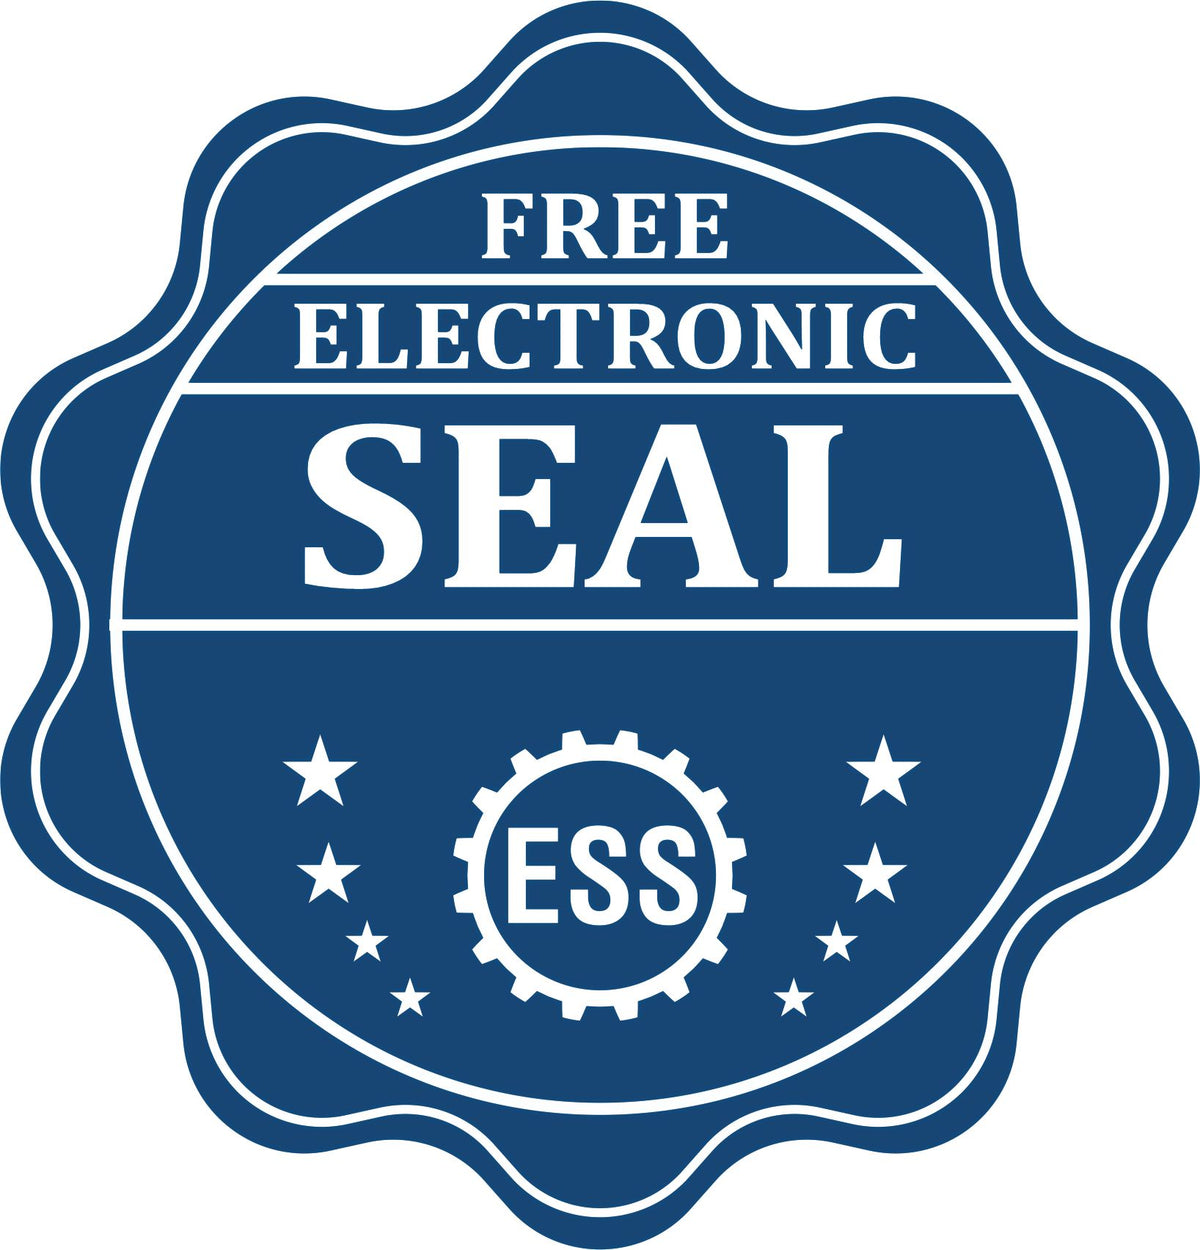 A badge showing a free electronic seal for the Hybrid Minnesota Landscape Architect Seal with stars and the ESS gear on the emblem.